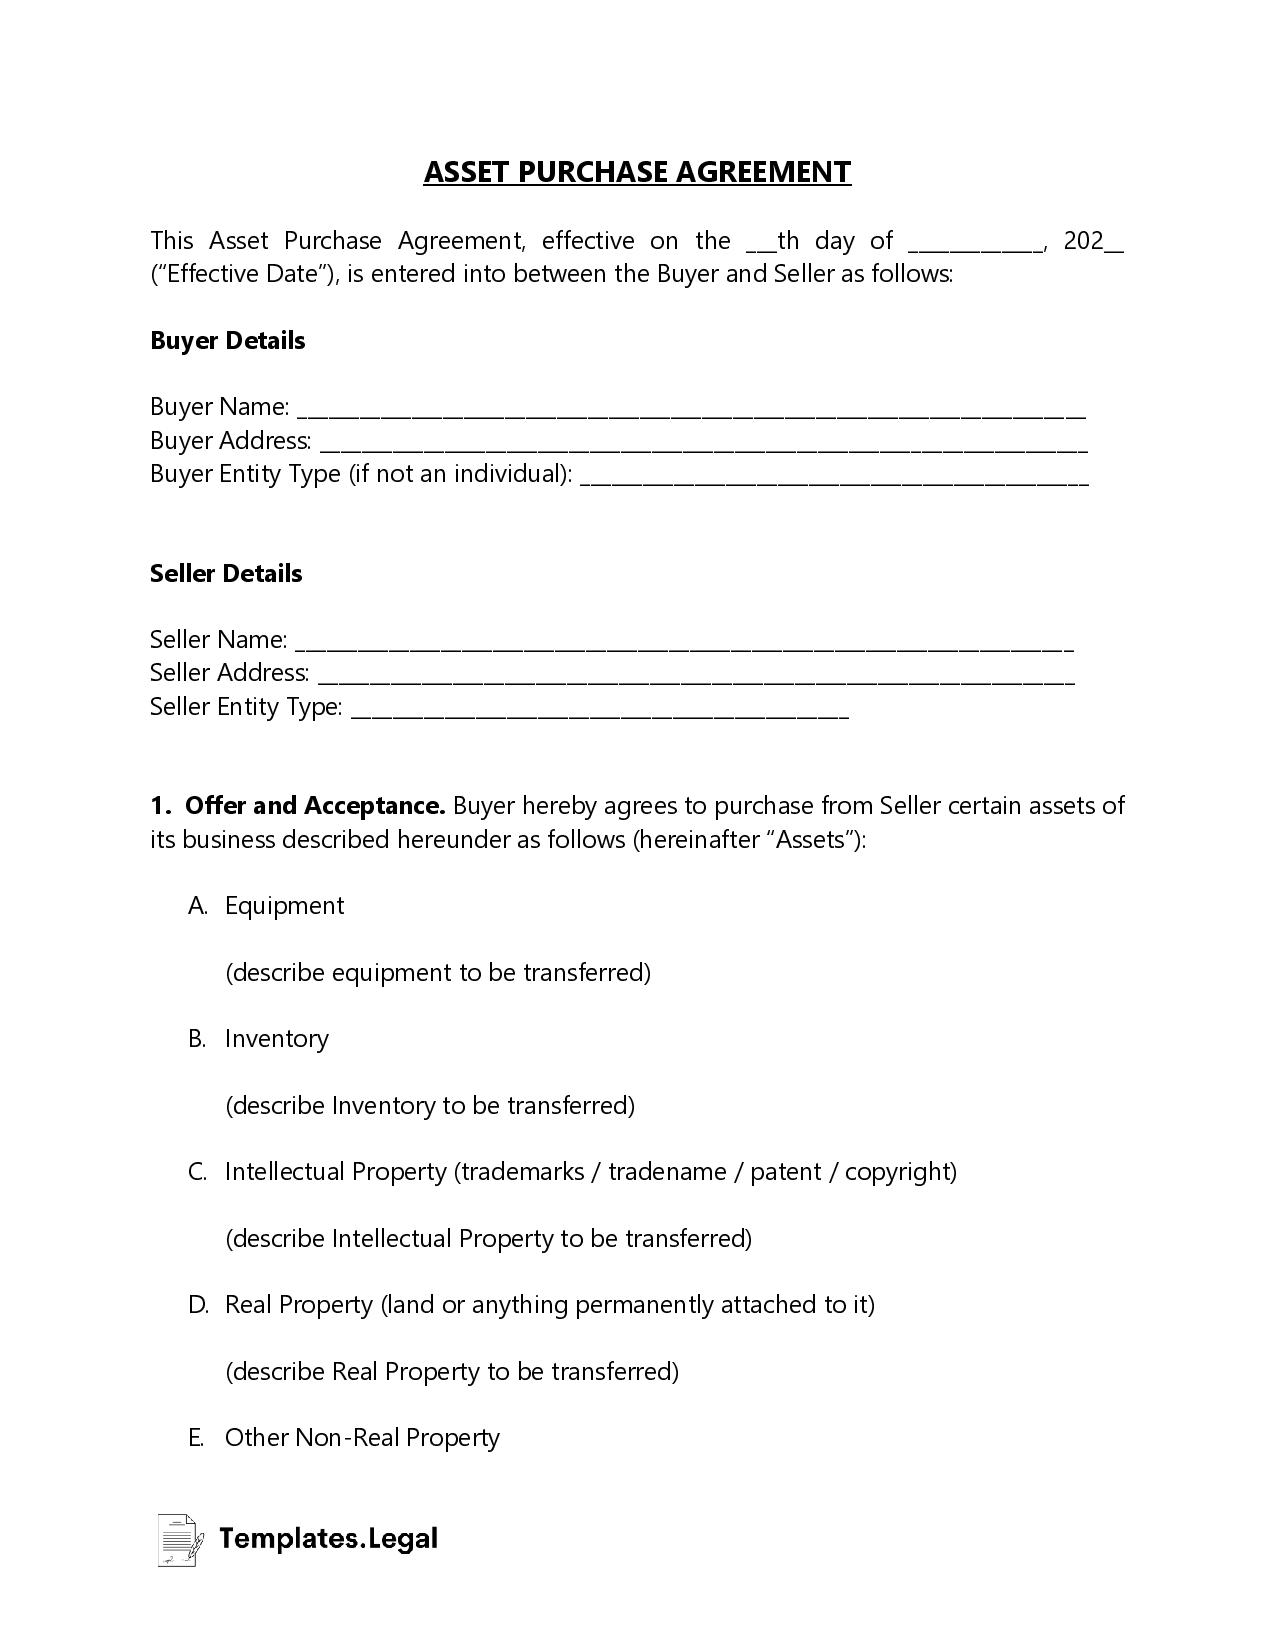 Asset Purchase Agreement - Templates.Legal